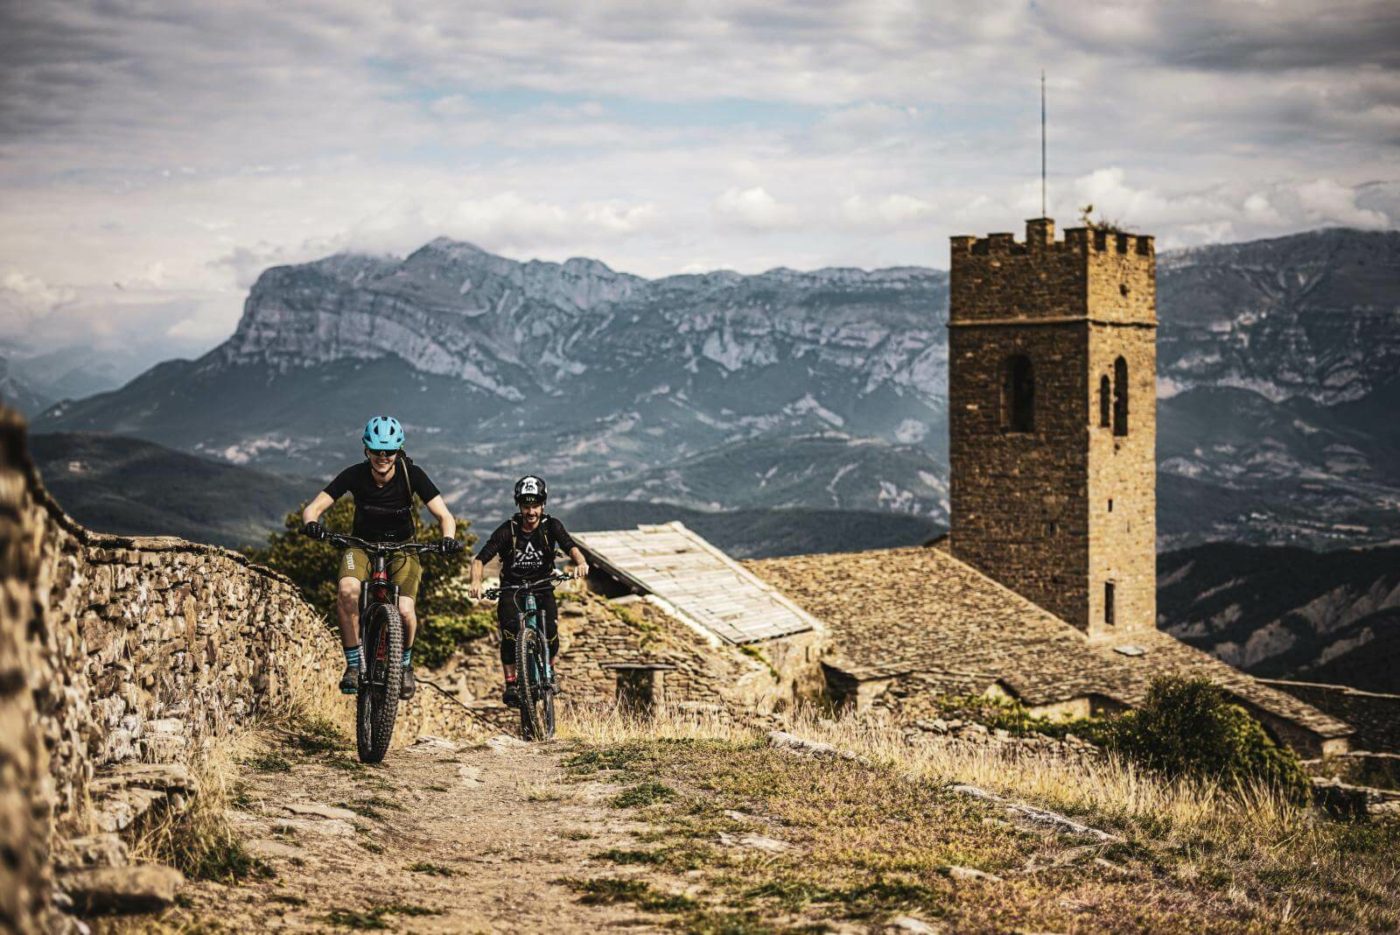 Two mountain bikers riding through Spain, coming up over a hill on a brown dirt path with the Pyrenees and an old stone fortress behind them.